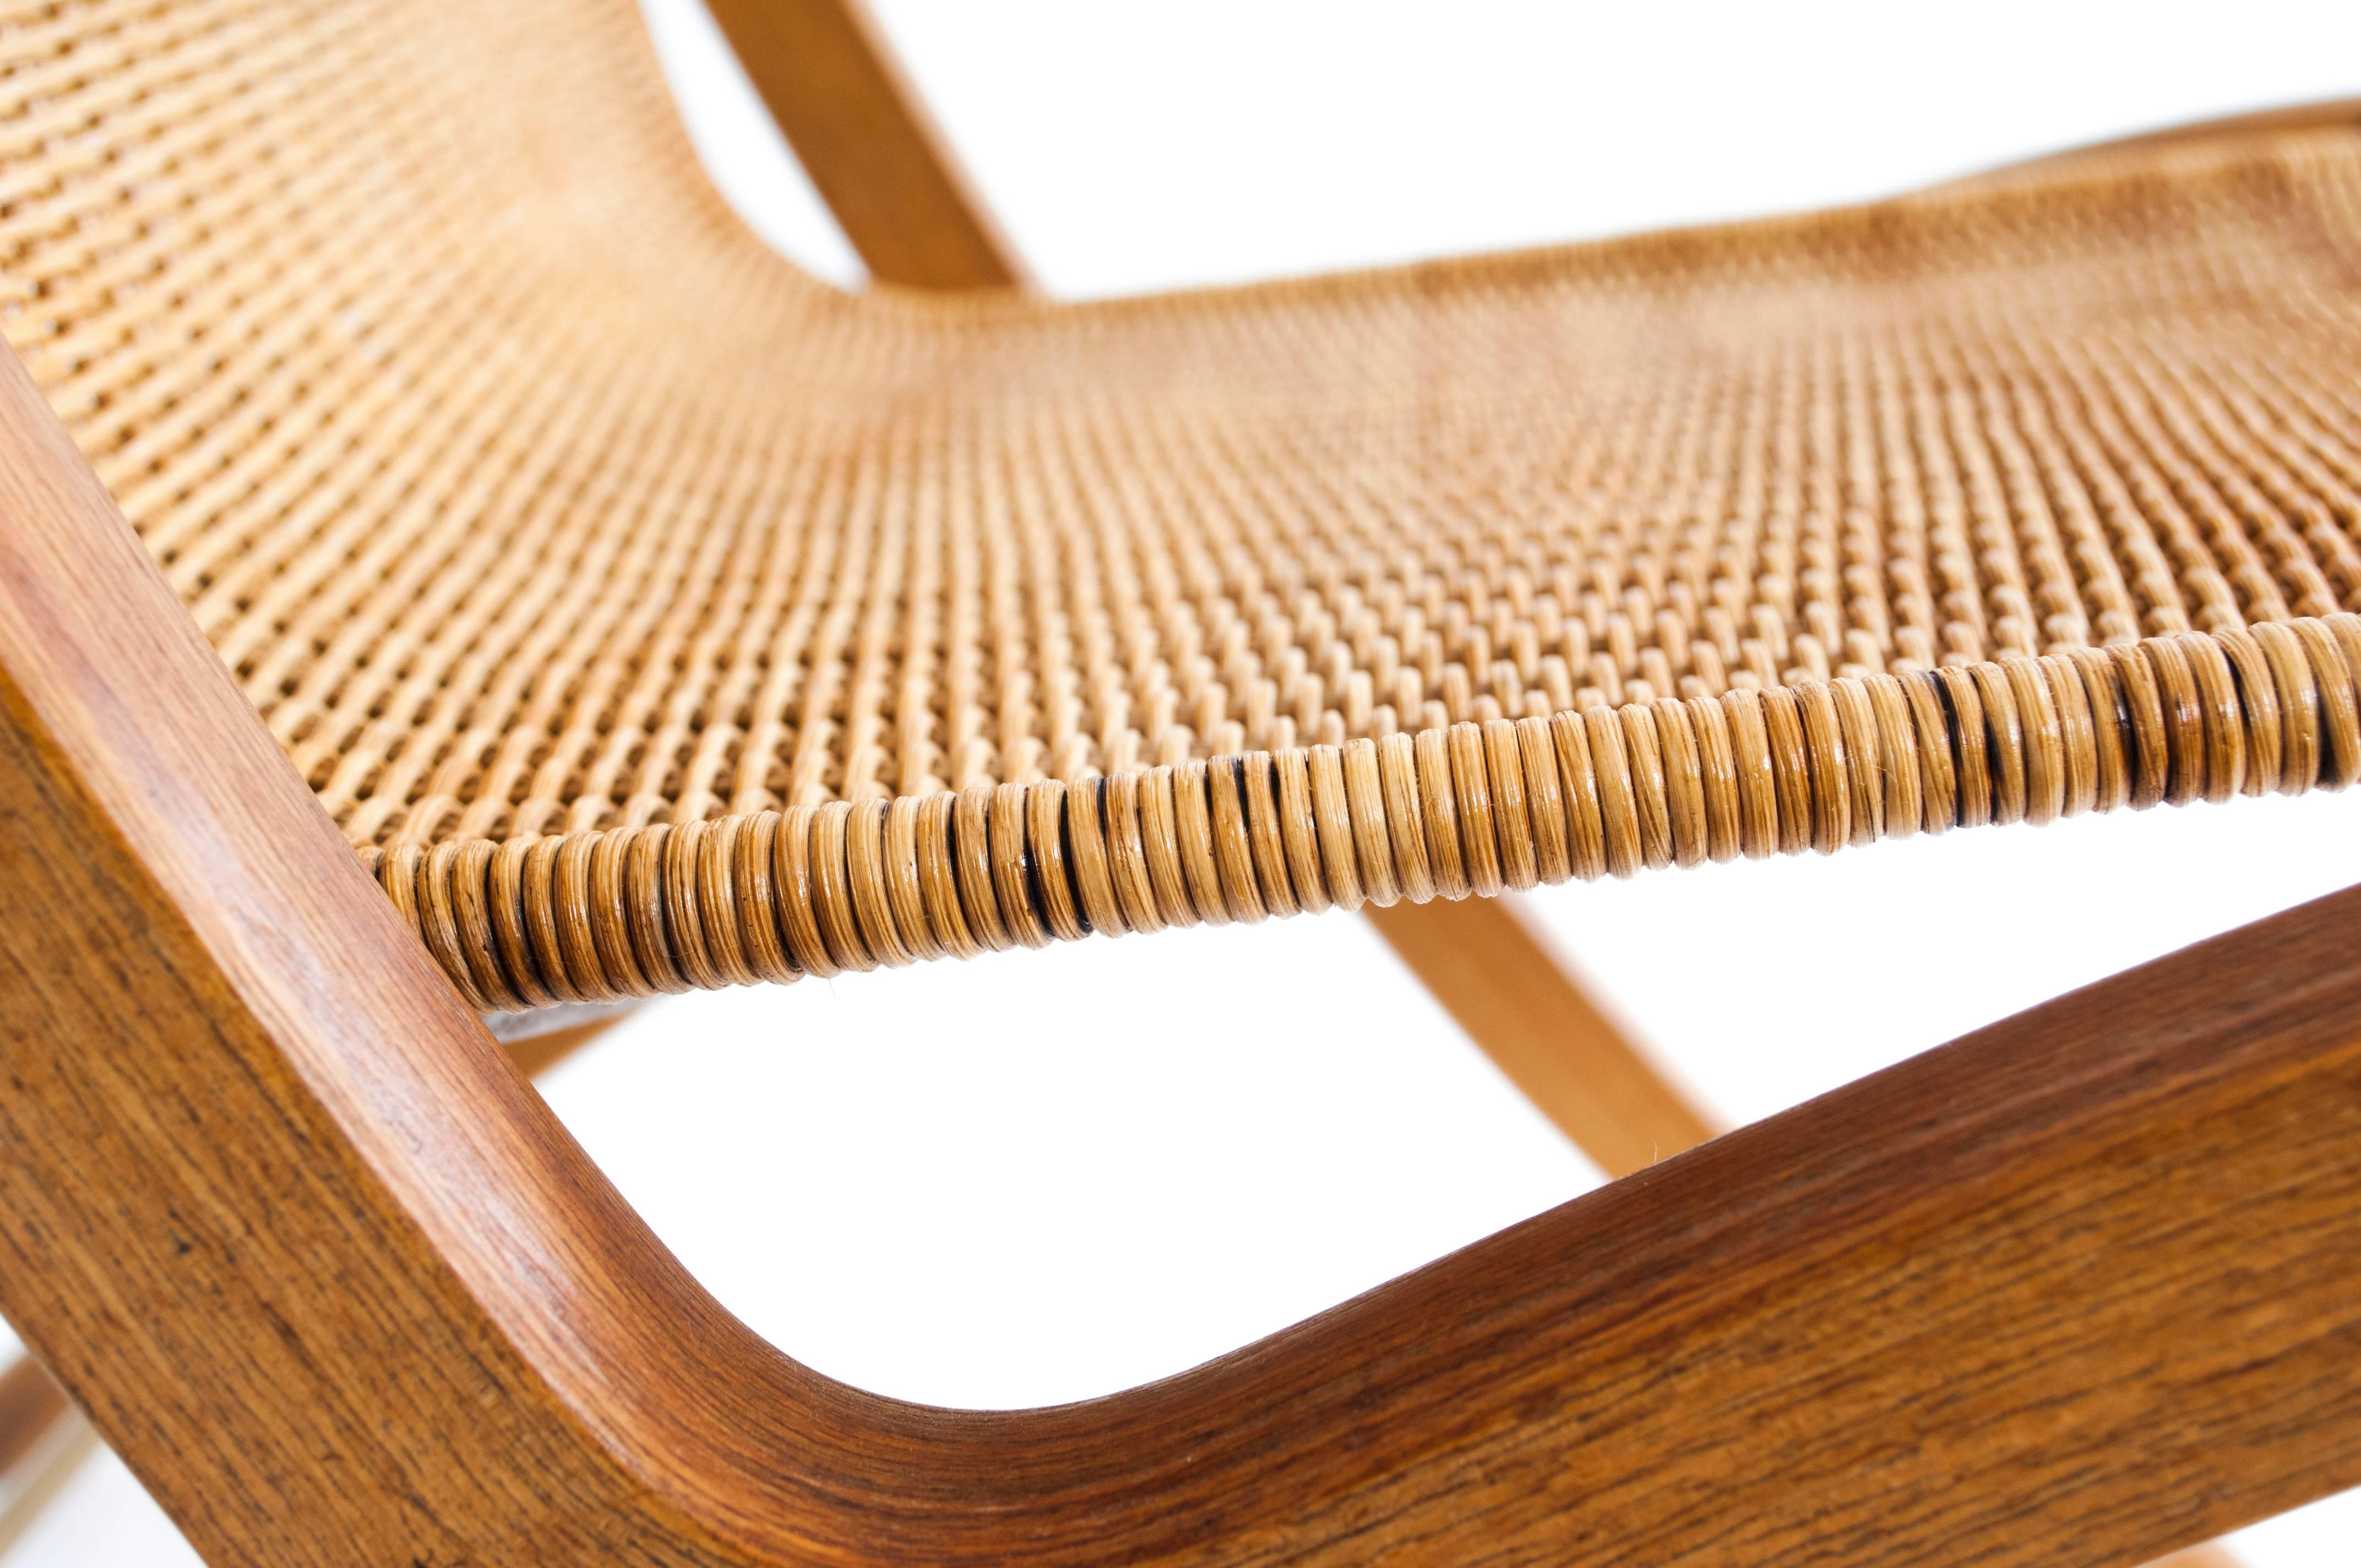 Peter Hvidt & Orla Mølgaard 

X-chair. Model 6103. 

Oak frame. Seat and back upholstered with woven cane. 

Designed circa 1958. 

Manufactured by Fritz Hansen.